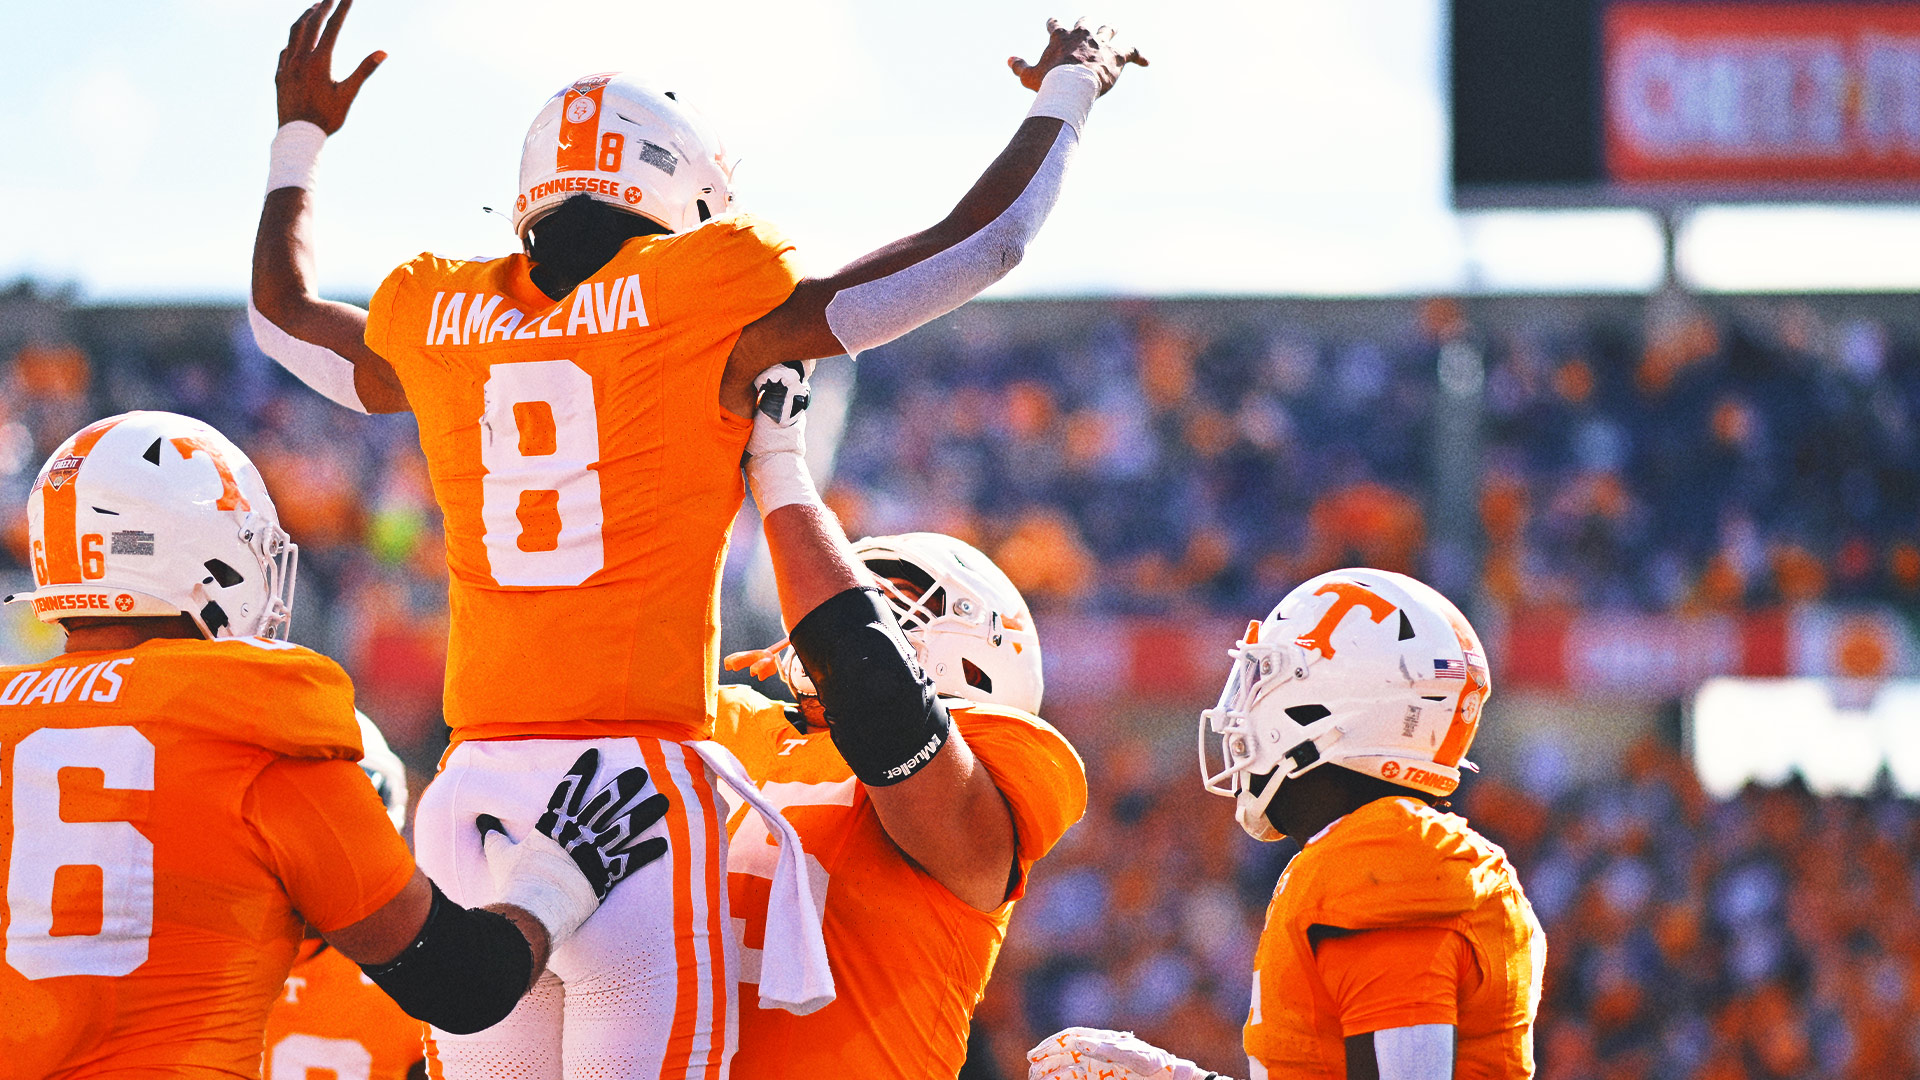 Nico Iamaleava leads Tennessee to rout of Iowa in Citrus Bowl